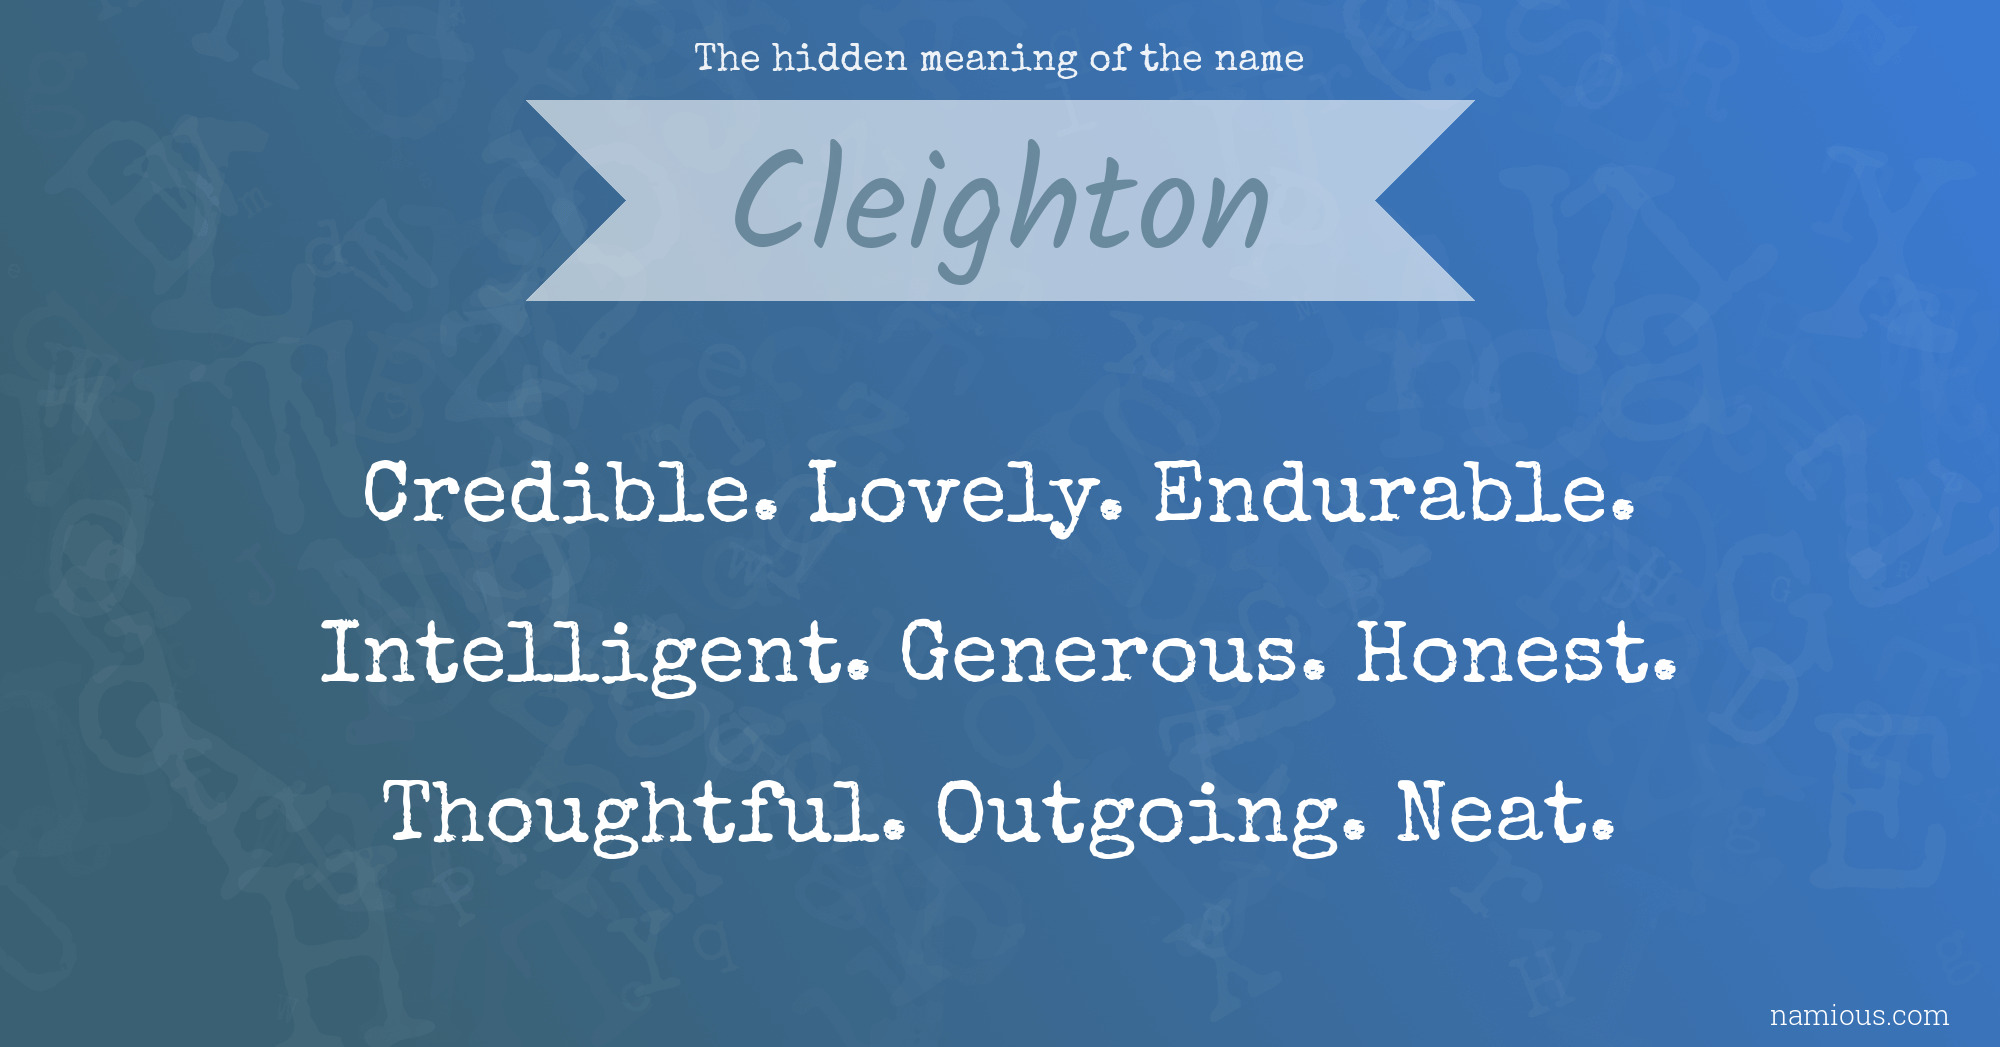 The hidden meaning of the name Cleighton